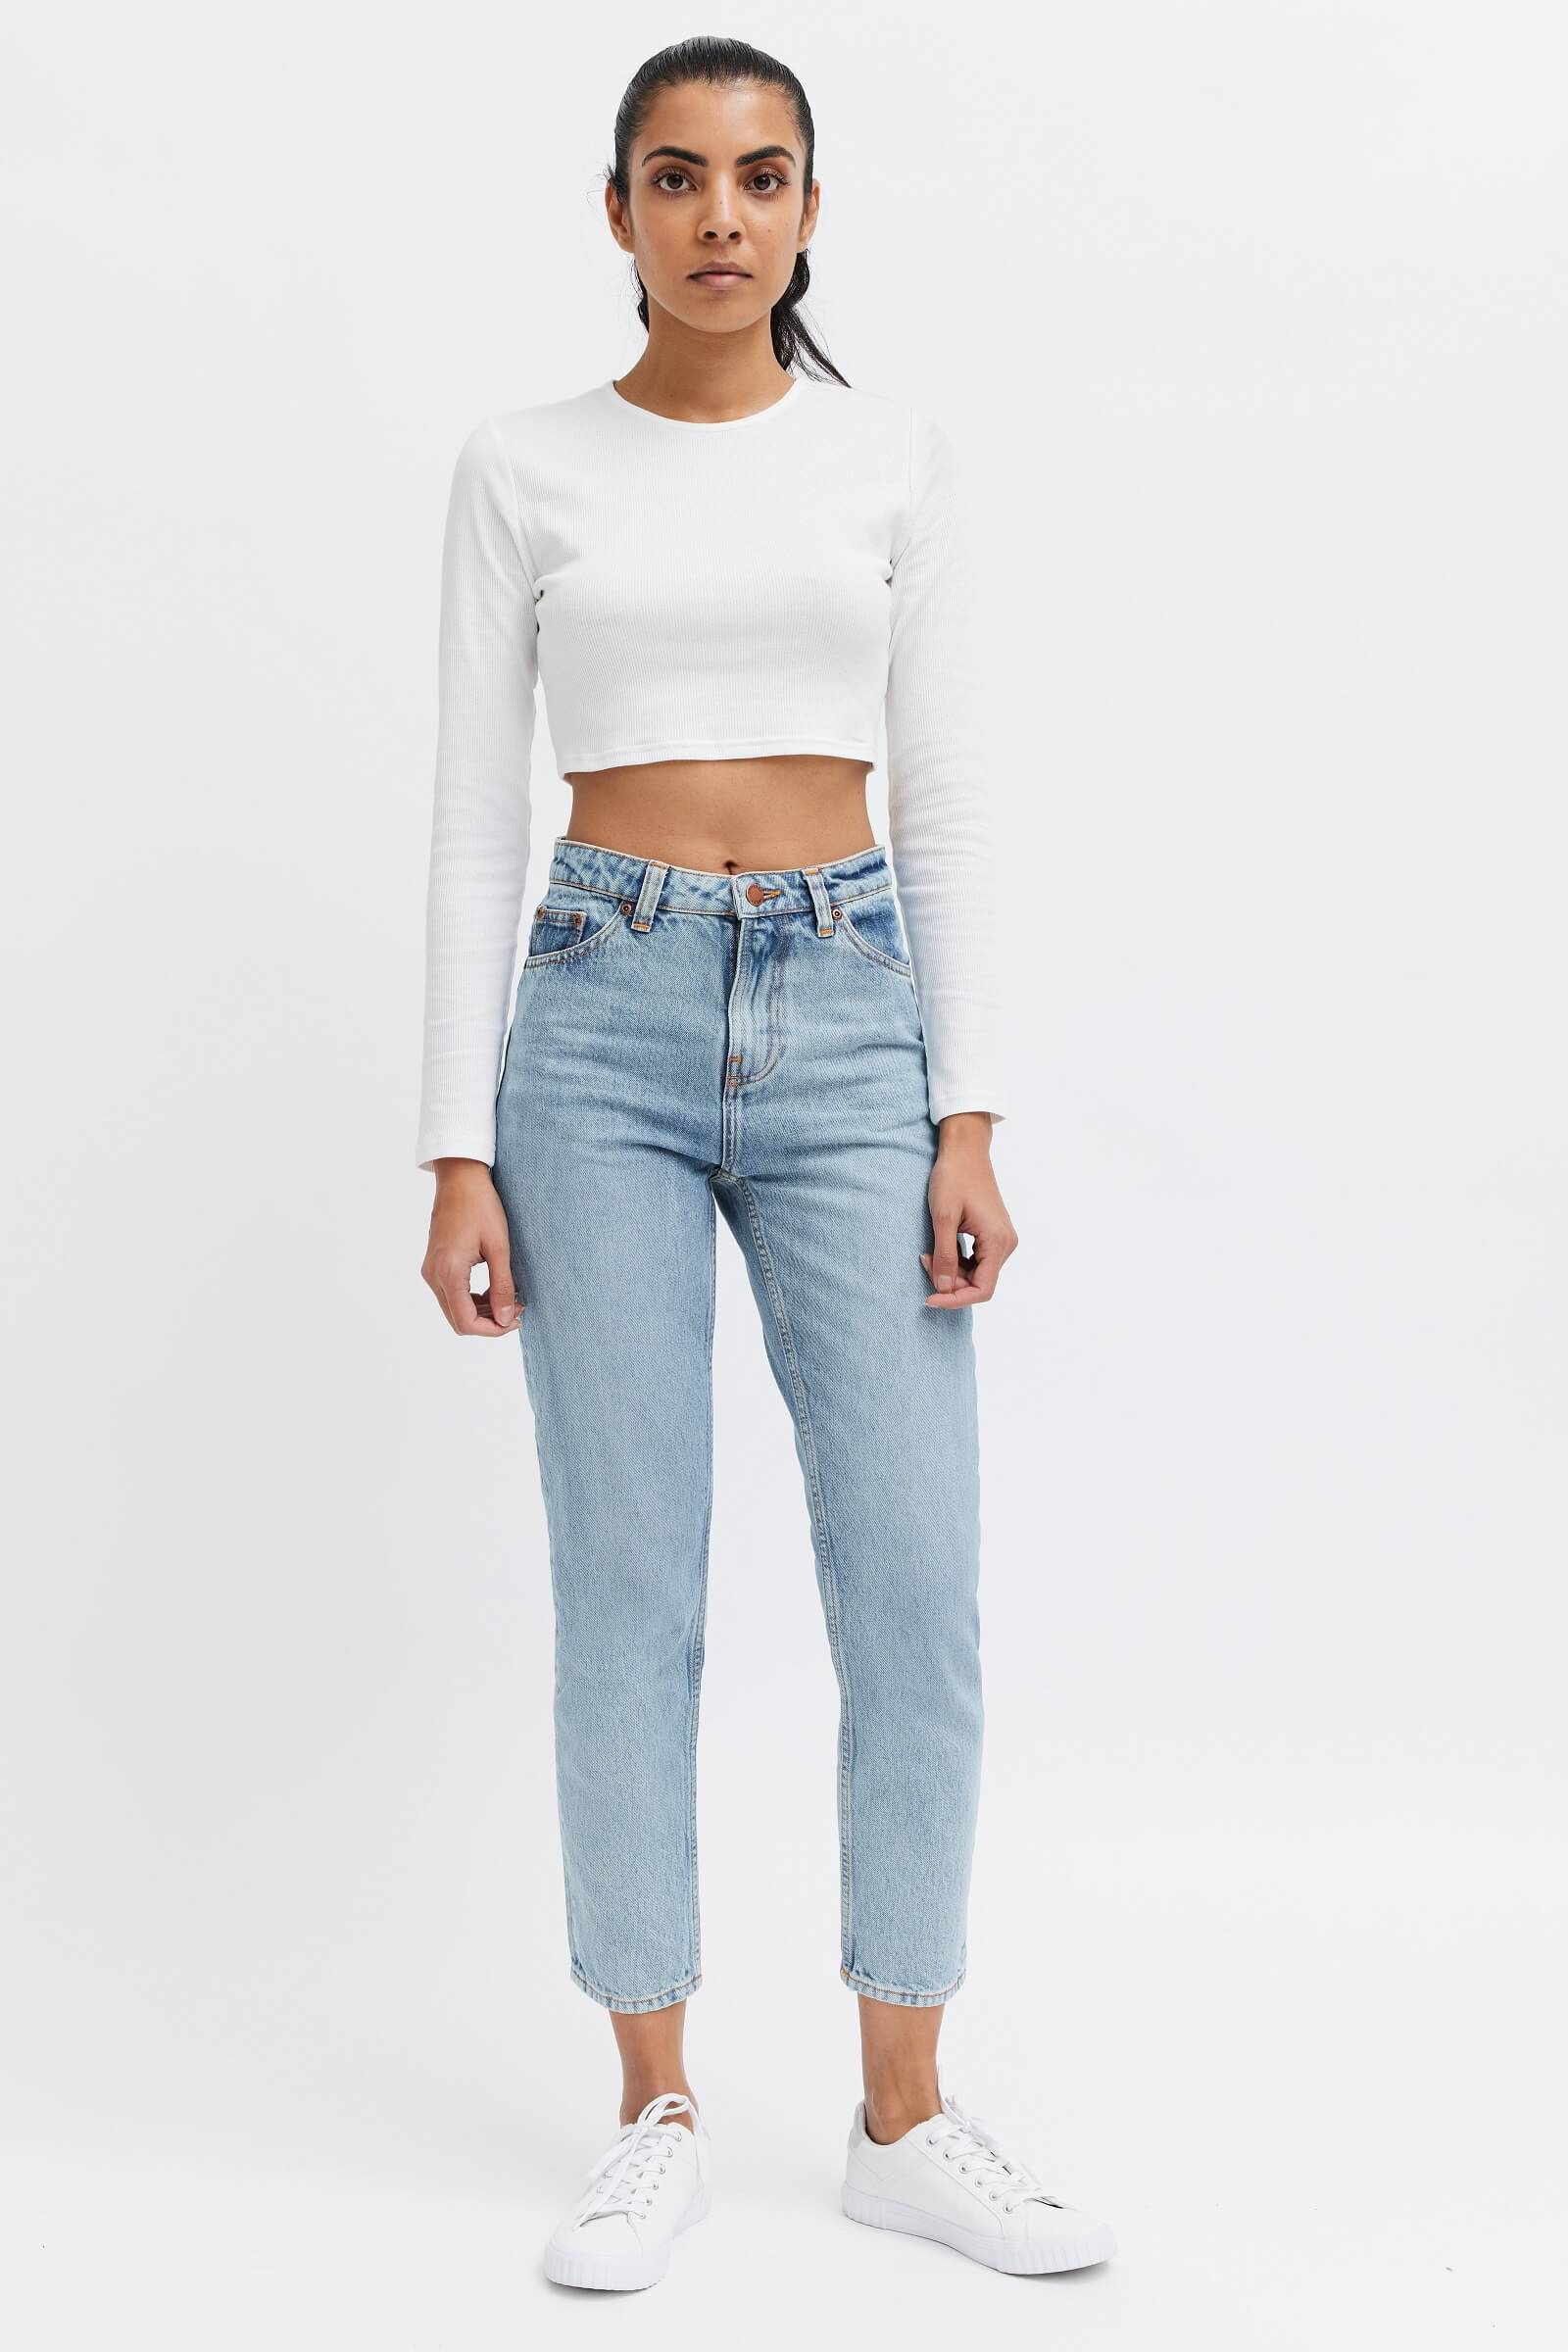 Best cropped jeans for women - Organic, Eco-friendly and Vegan Denim 